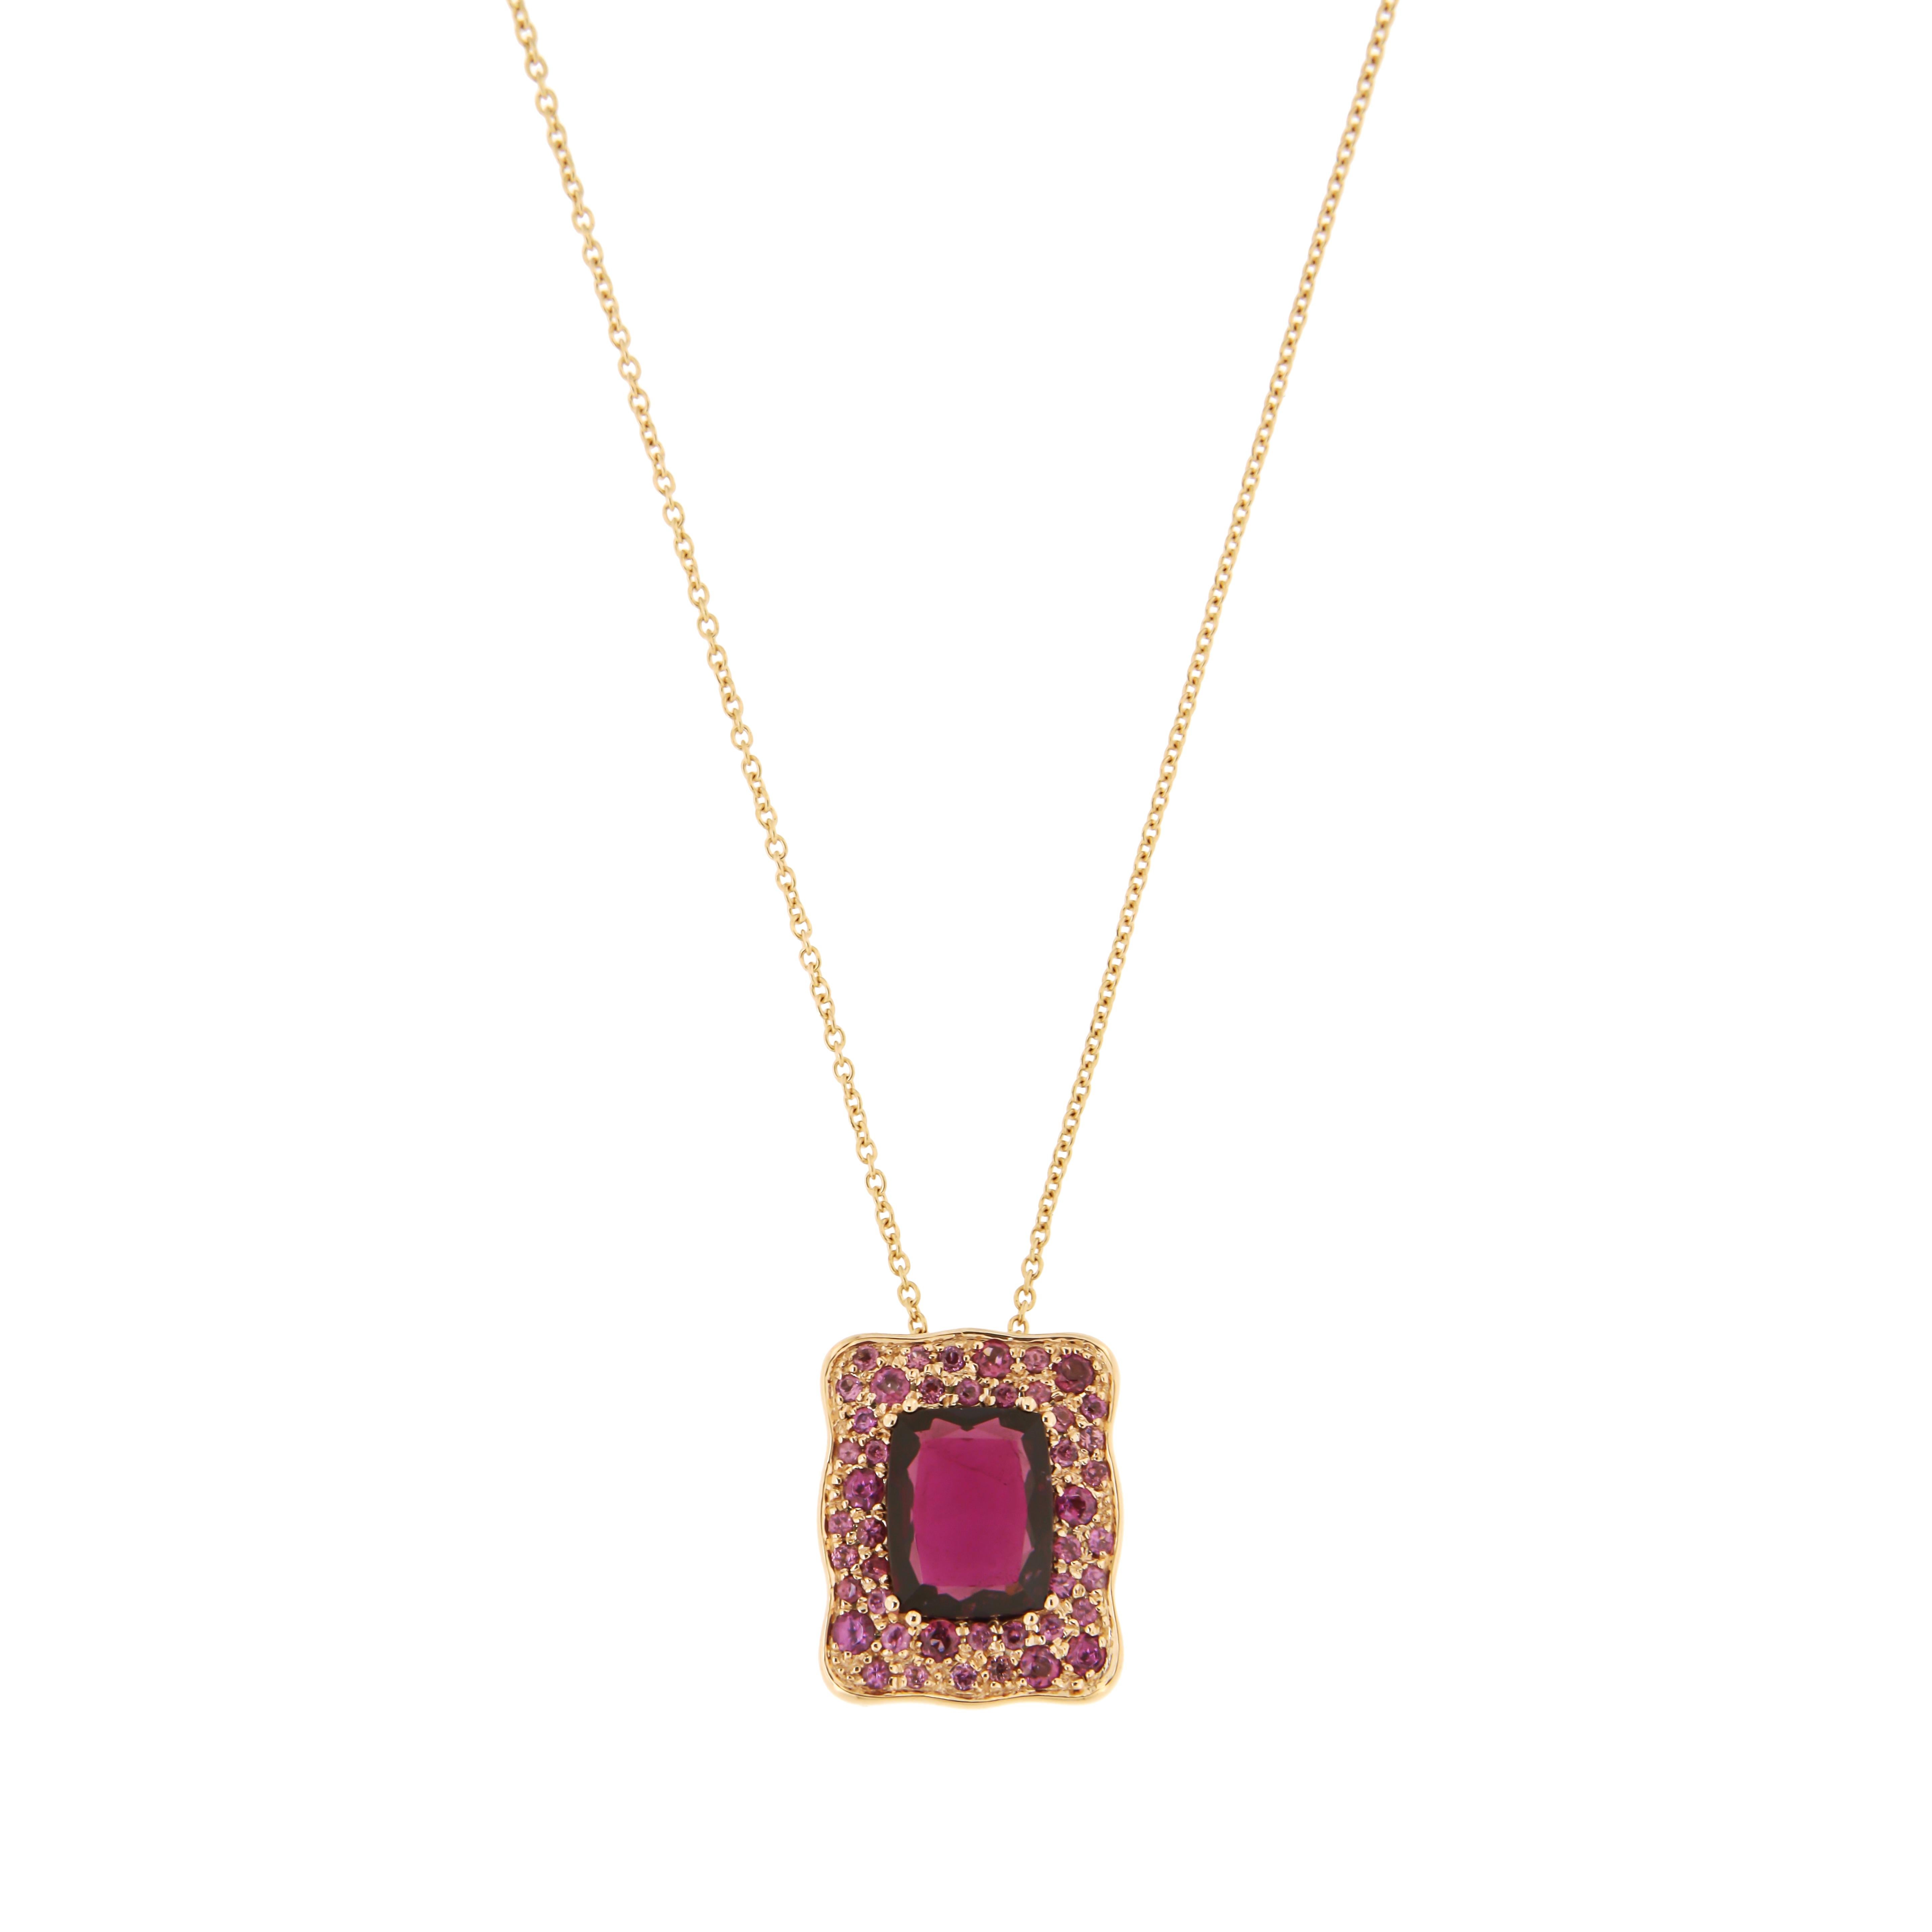 Stylish 18k Rhodolite Rose Gold Pendant Necklace for Her Made in Italy For Sale 1